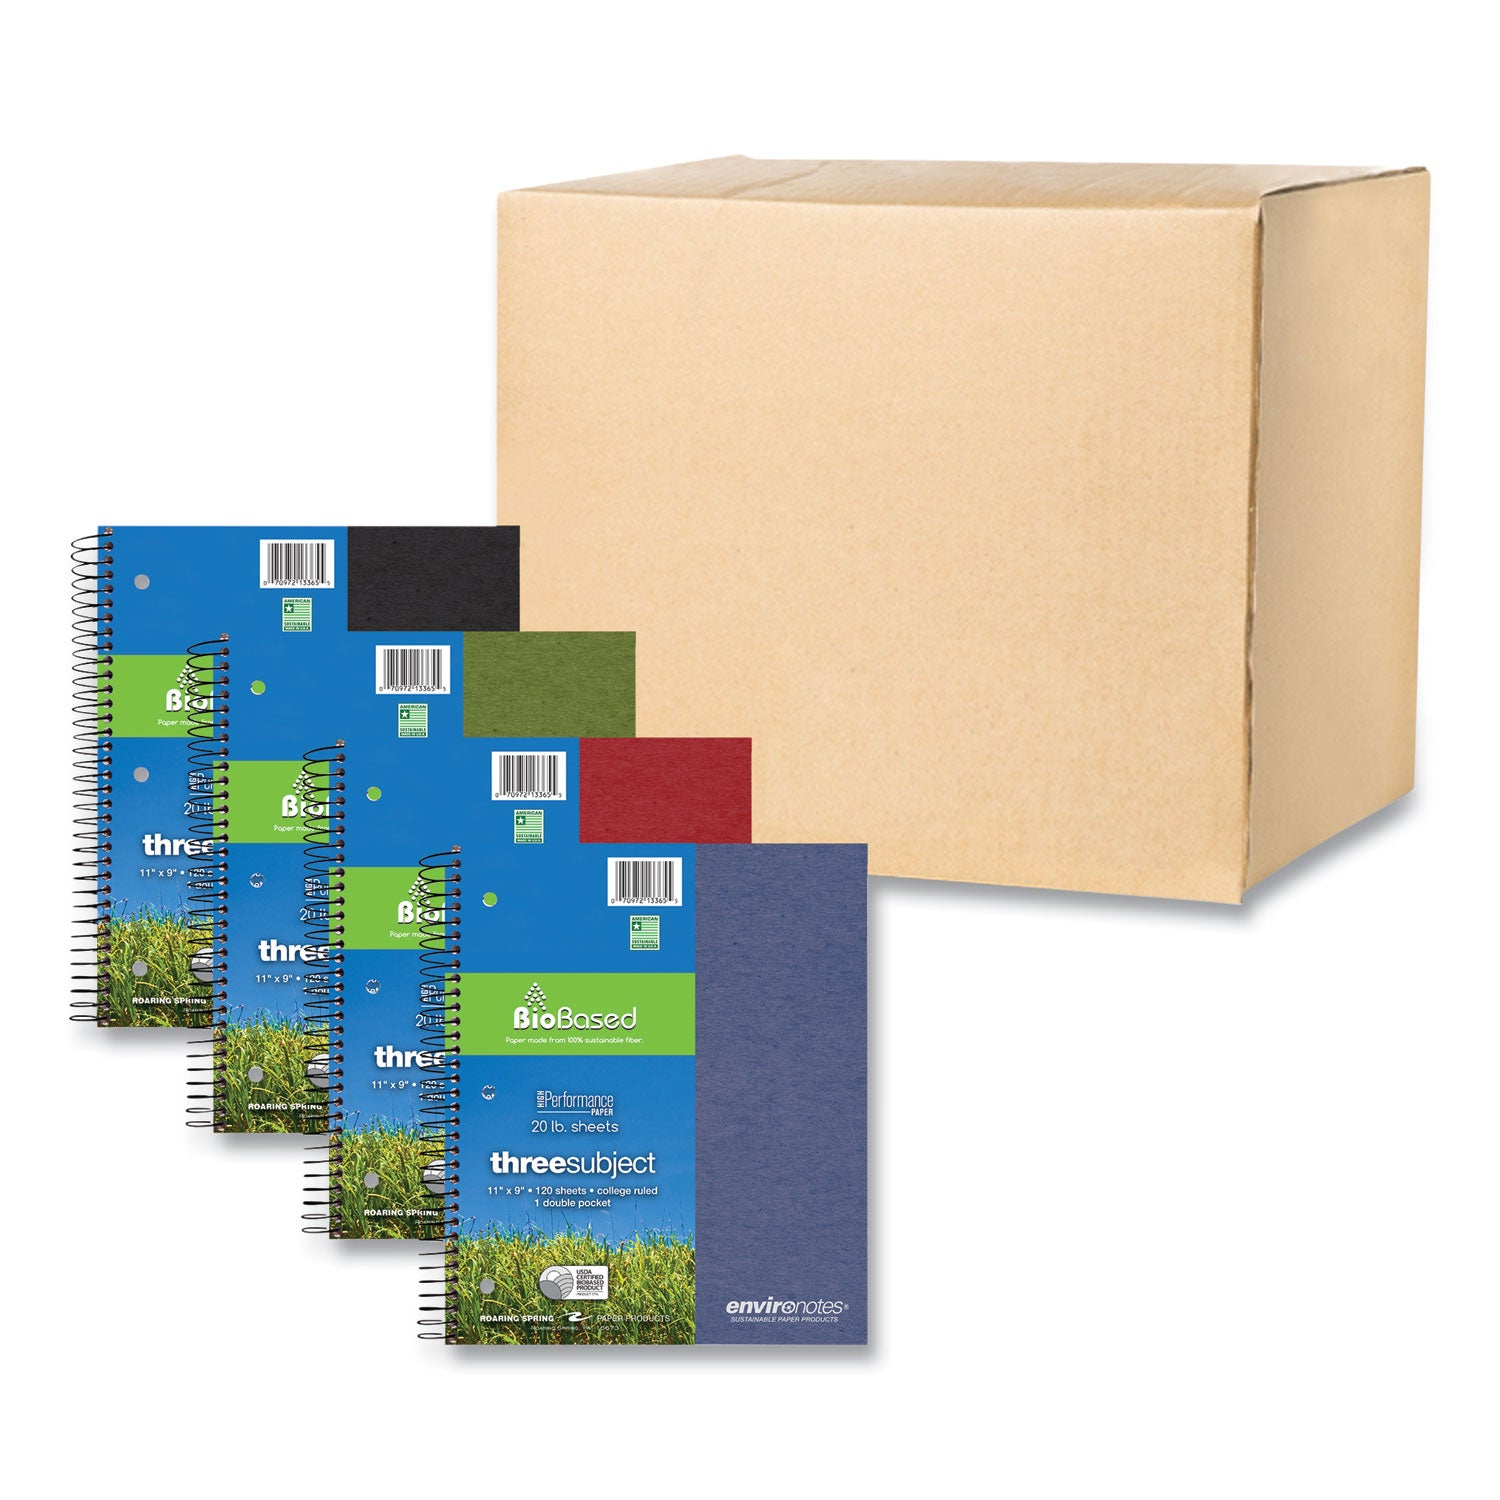 earthtones-biobased-3-subject-notebook-med-college-rule-random-asst-covers-120-11x9-sheets-24-ctships-in-4-6-bus-days_roa13365cs - 1